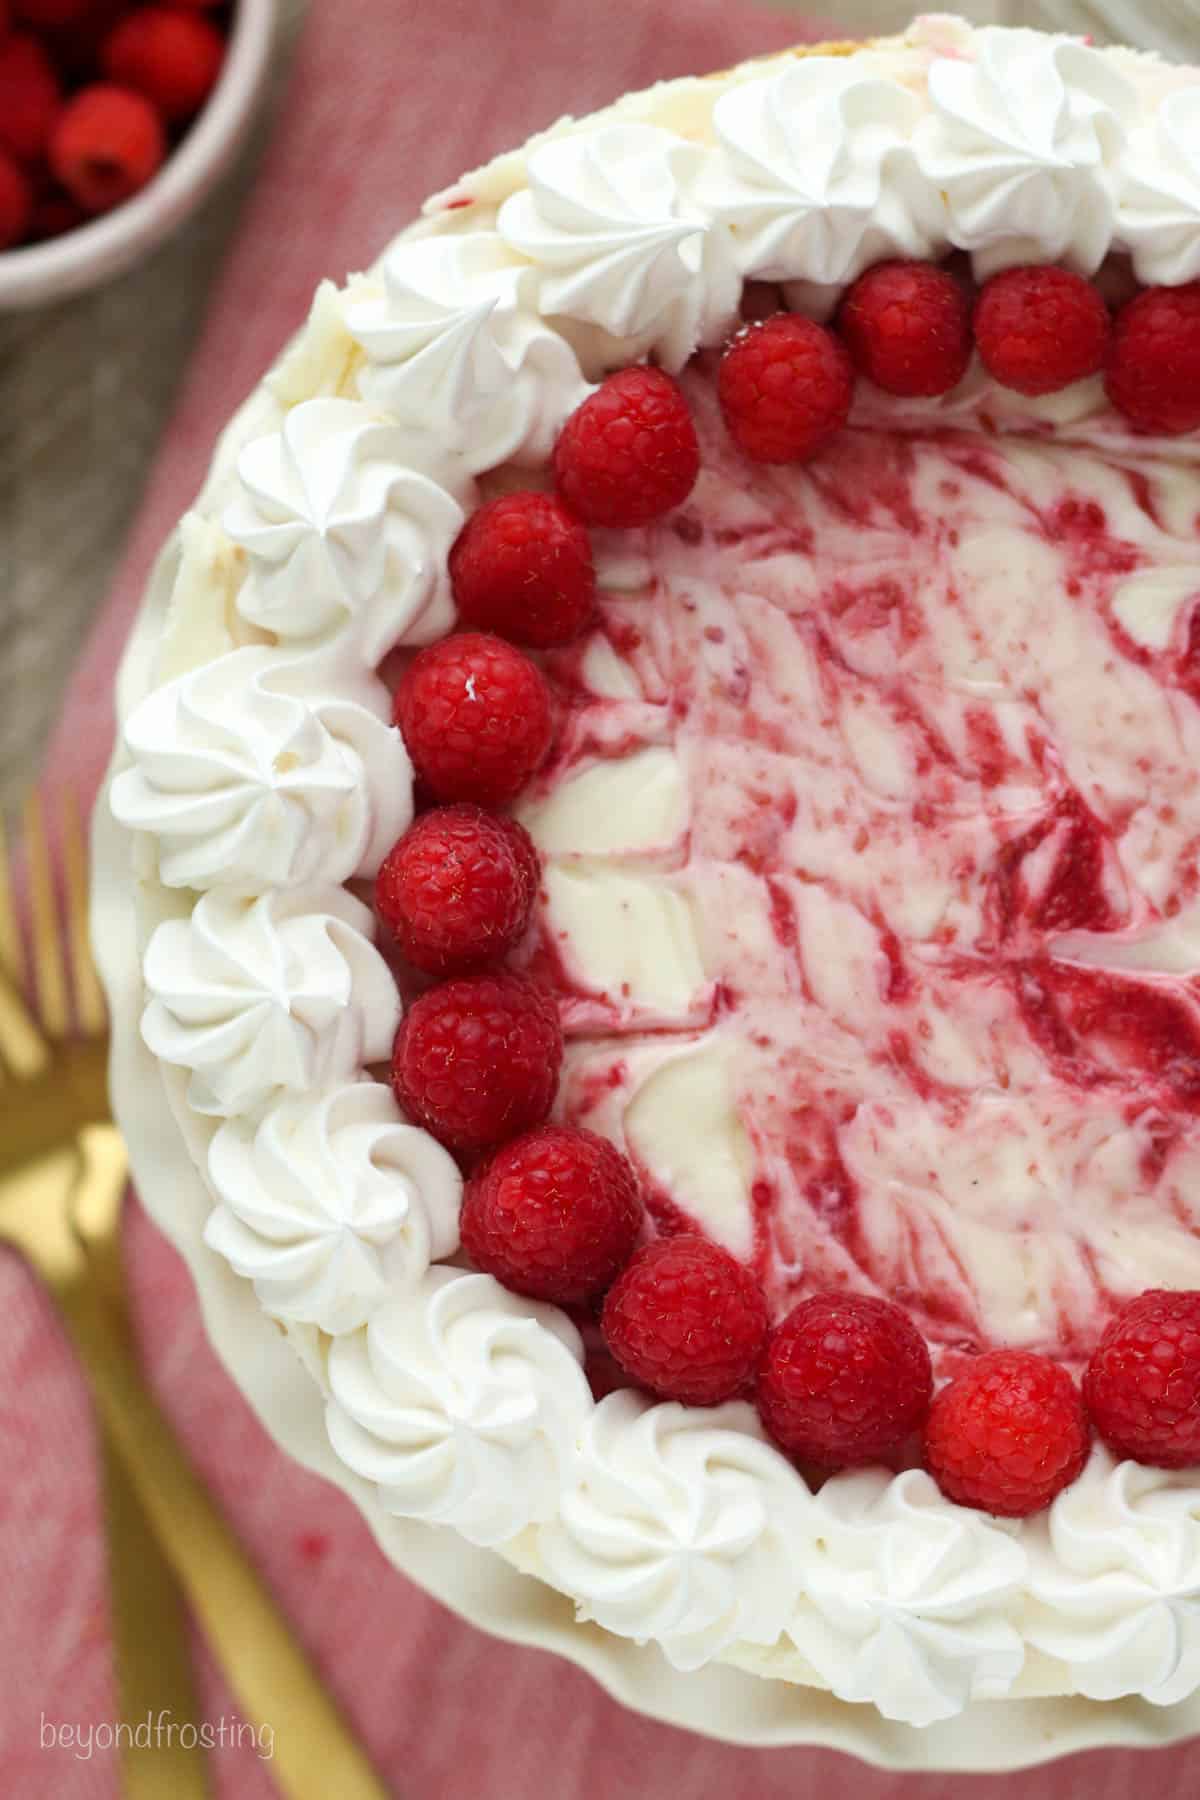 Overhead view of a swirled raspberry cheesecake decorated with whipped cream and raspberries